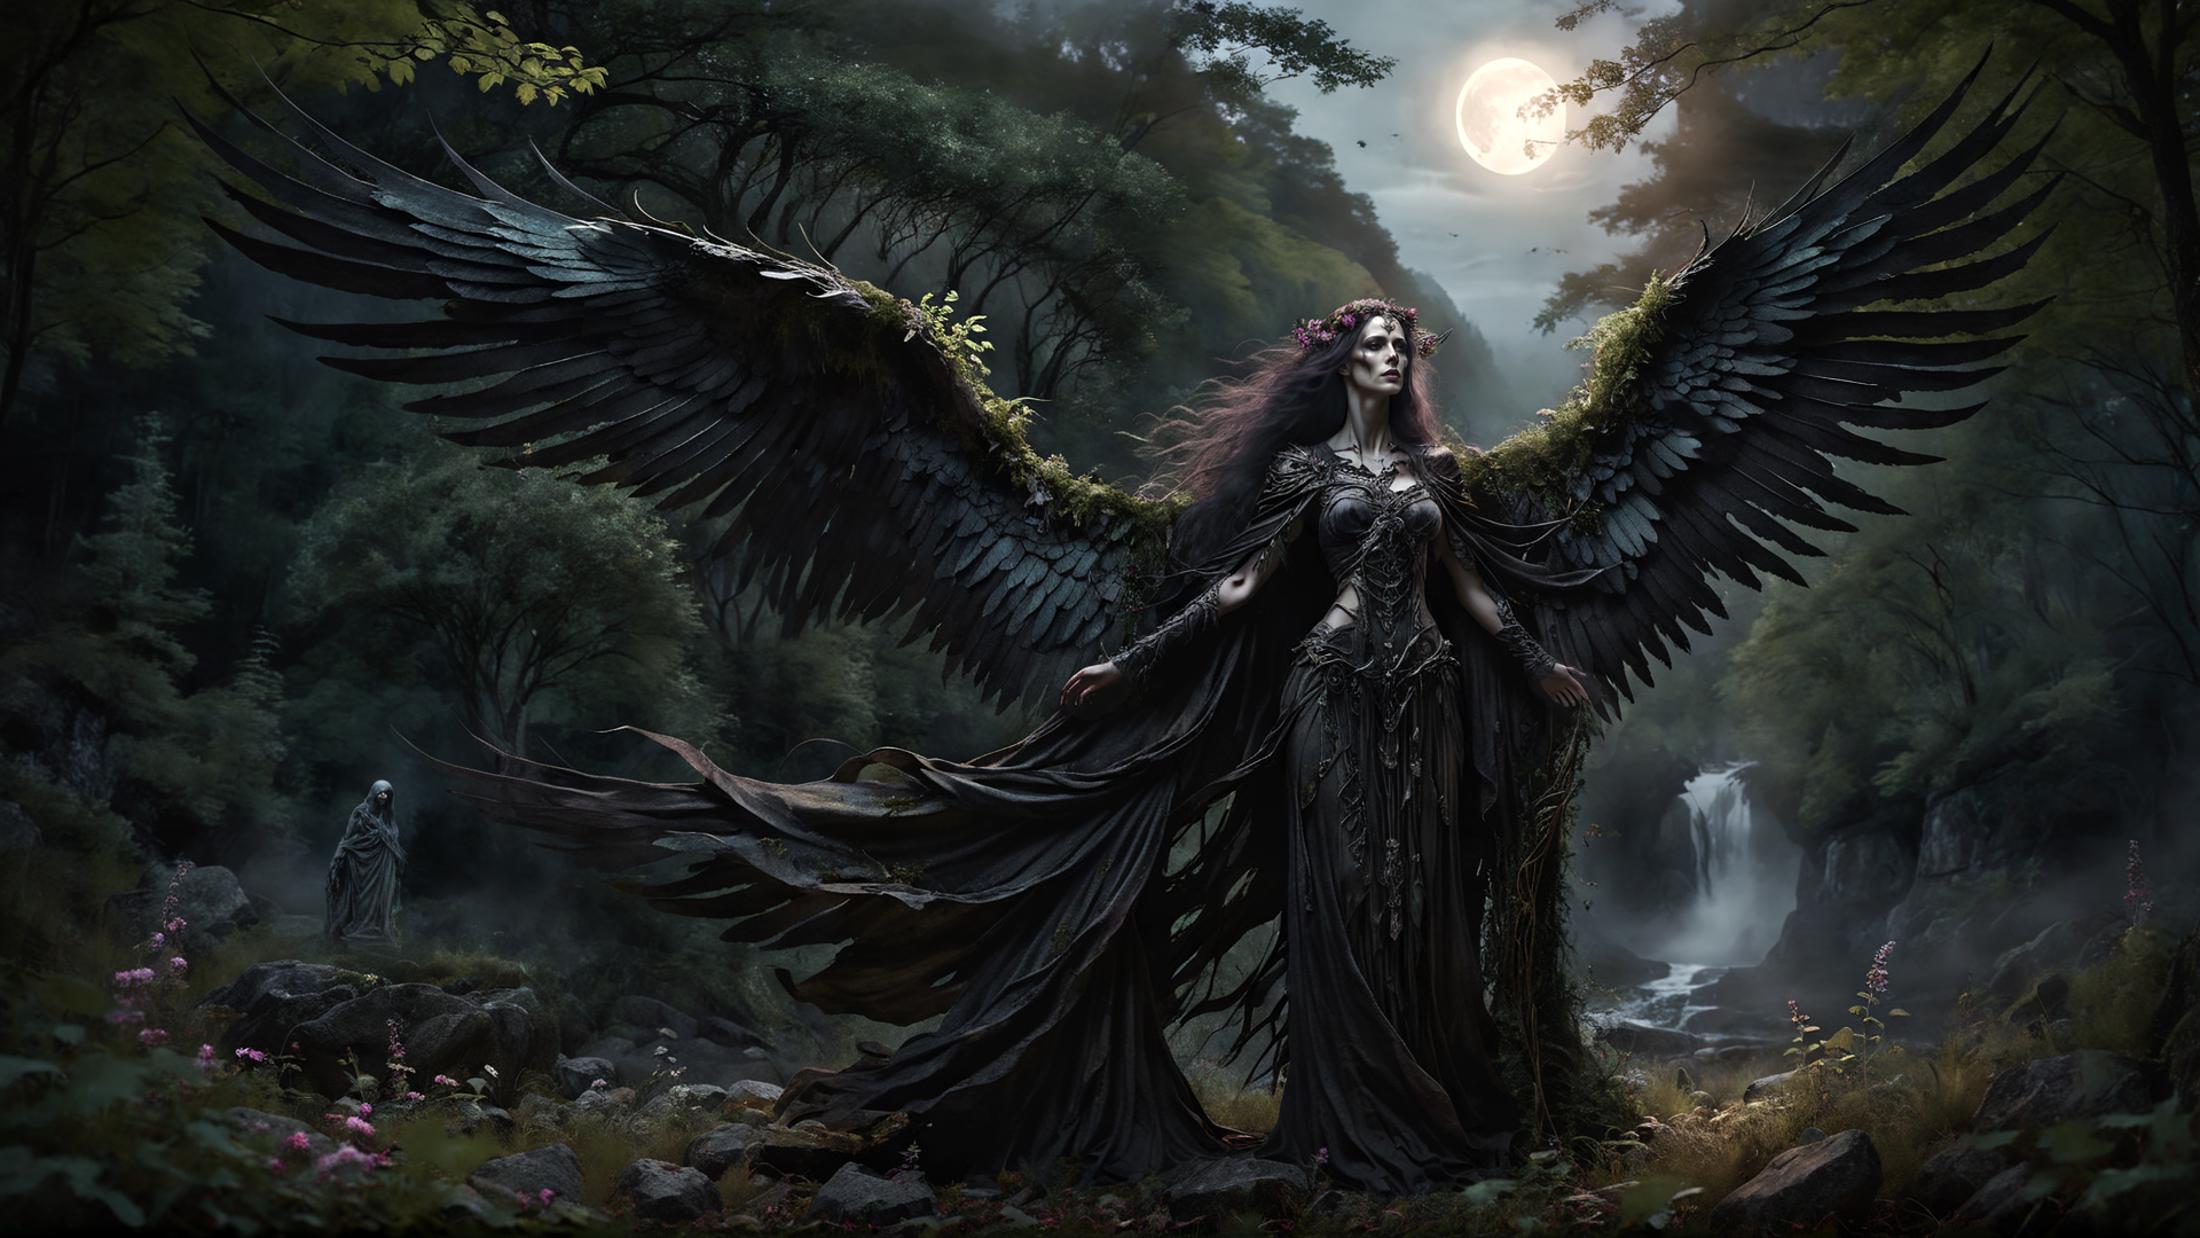 A dark-haired woman wearing a dark dress and wings, standing near a waterfall.